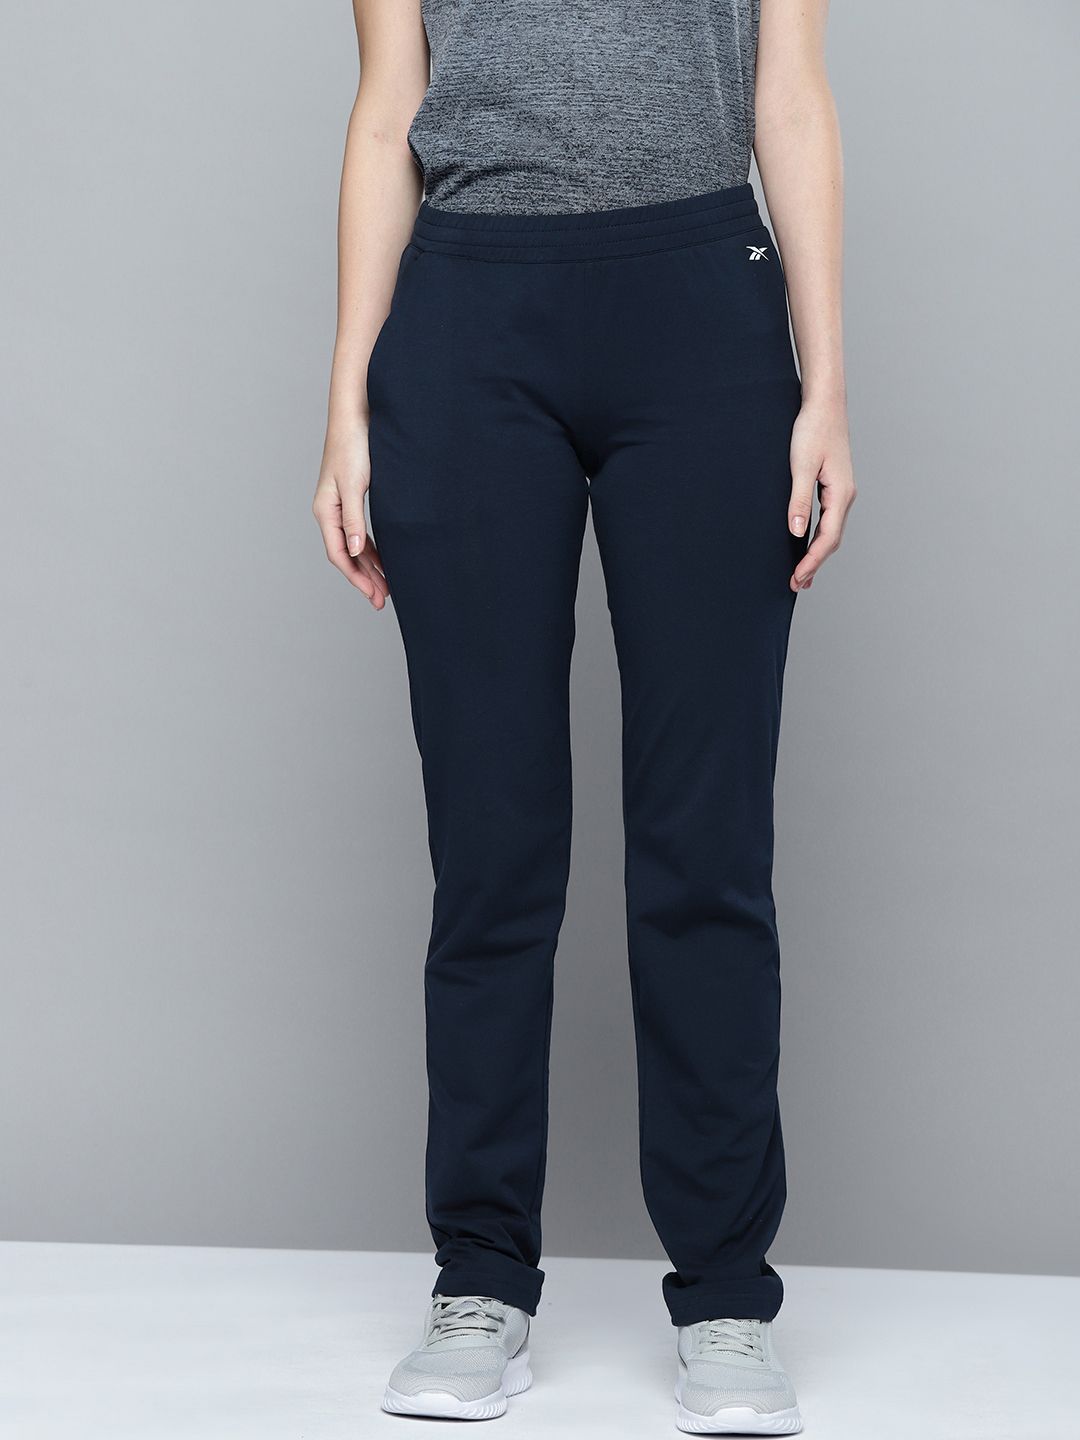 Reebok Women Navy Blue Solid Training FND Track Pants Price in India